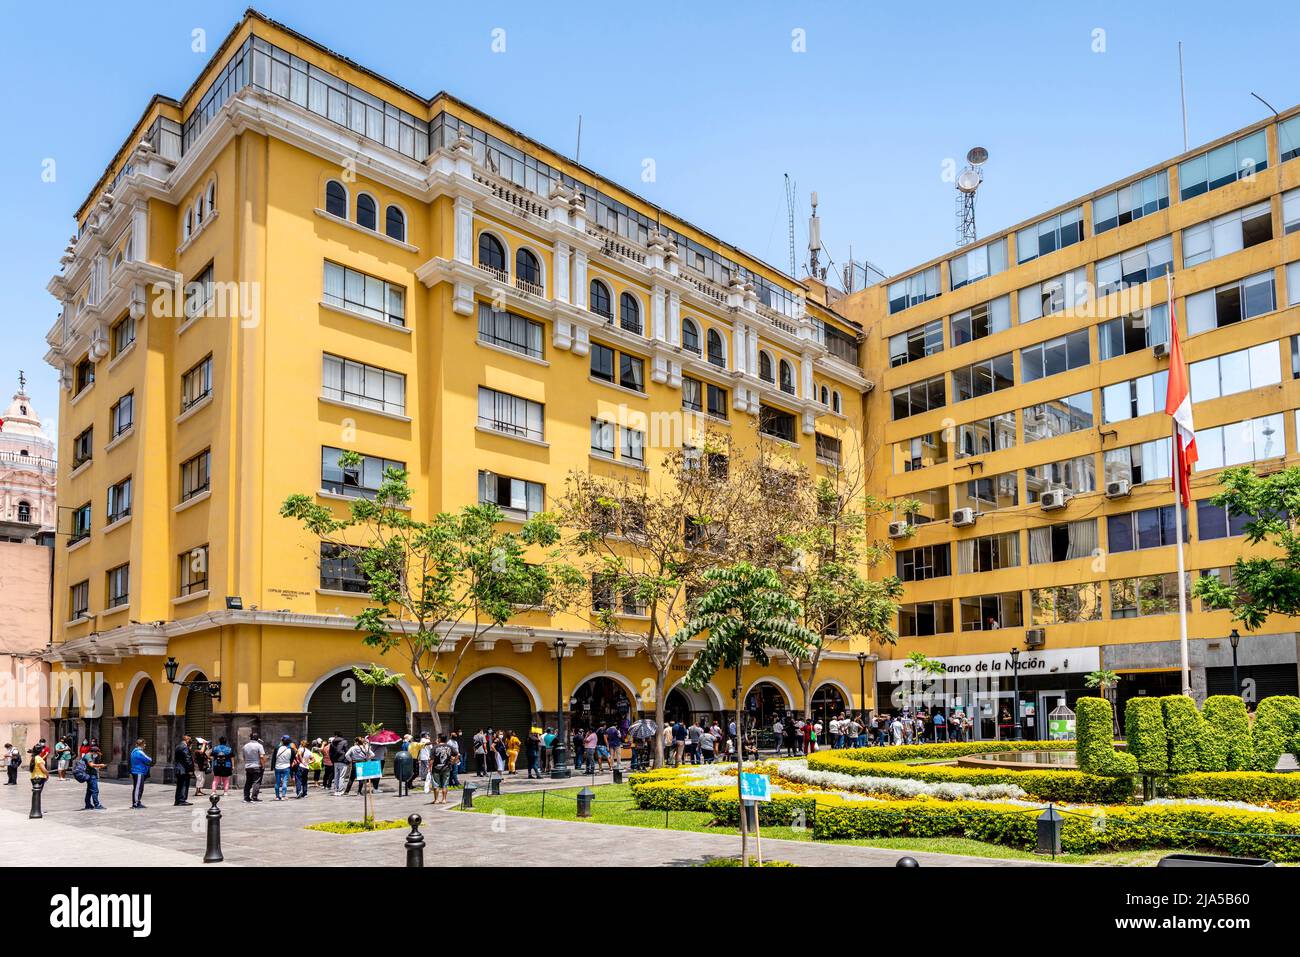 Peruvian People Queueing Outside A Bank In Central Lima, Lima, Peru. Stock Photo